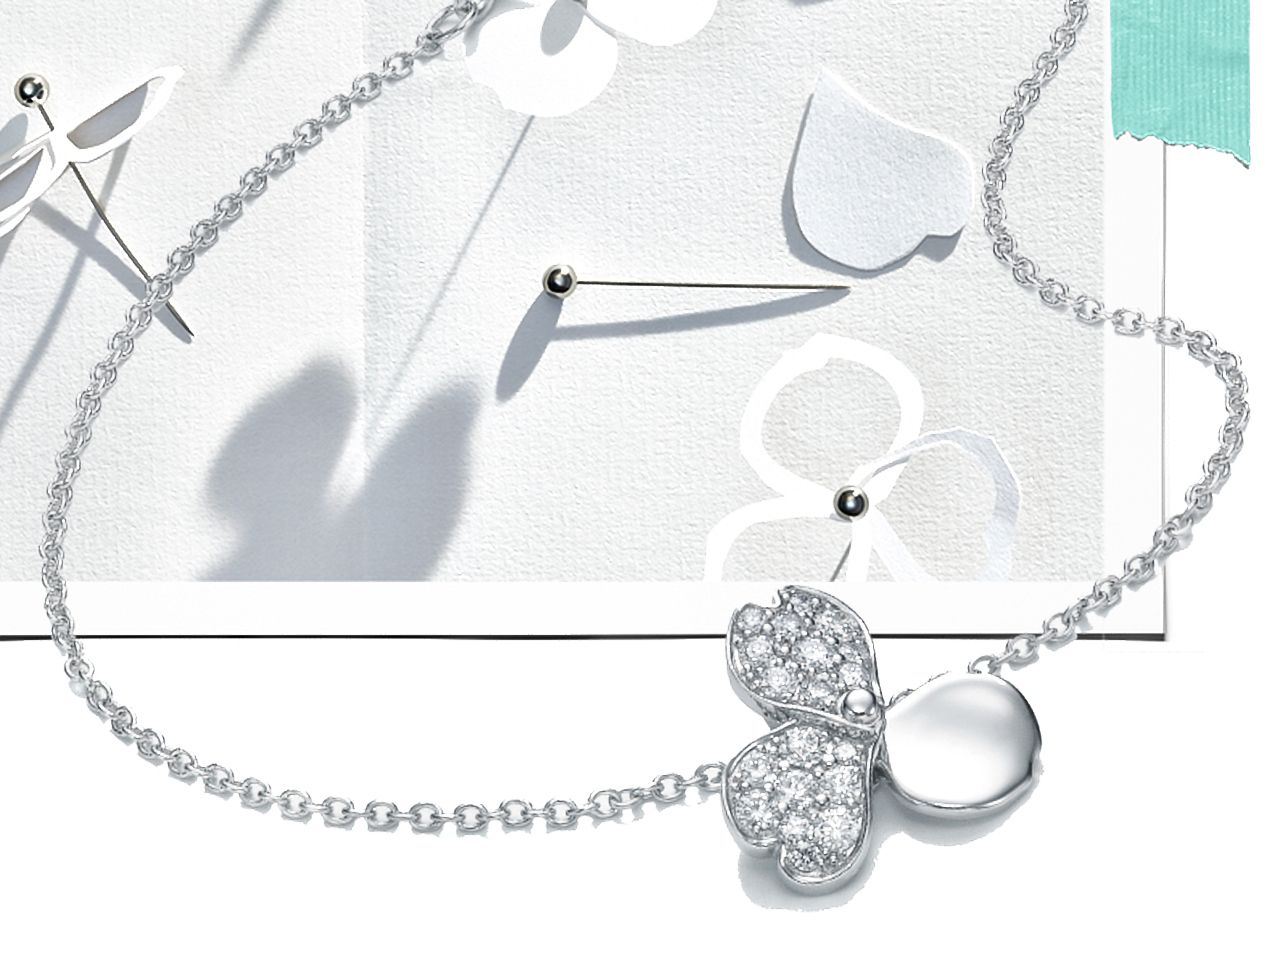 Chinese Whispers: Tiffany to Launch E-commerce Store in China Next Year, and More